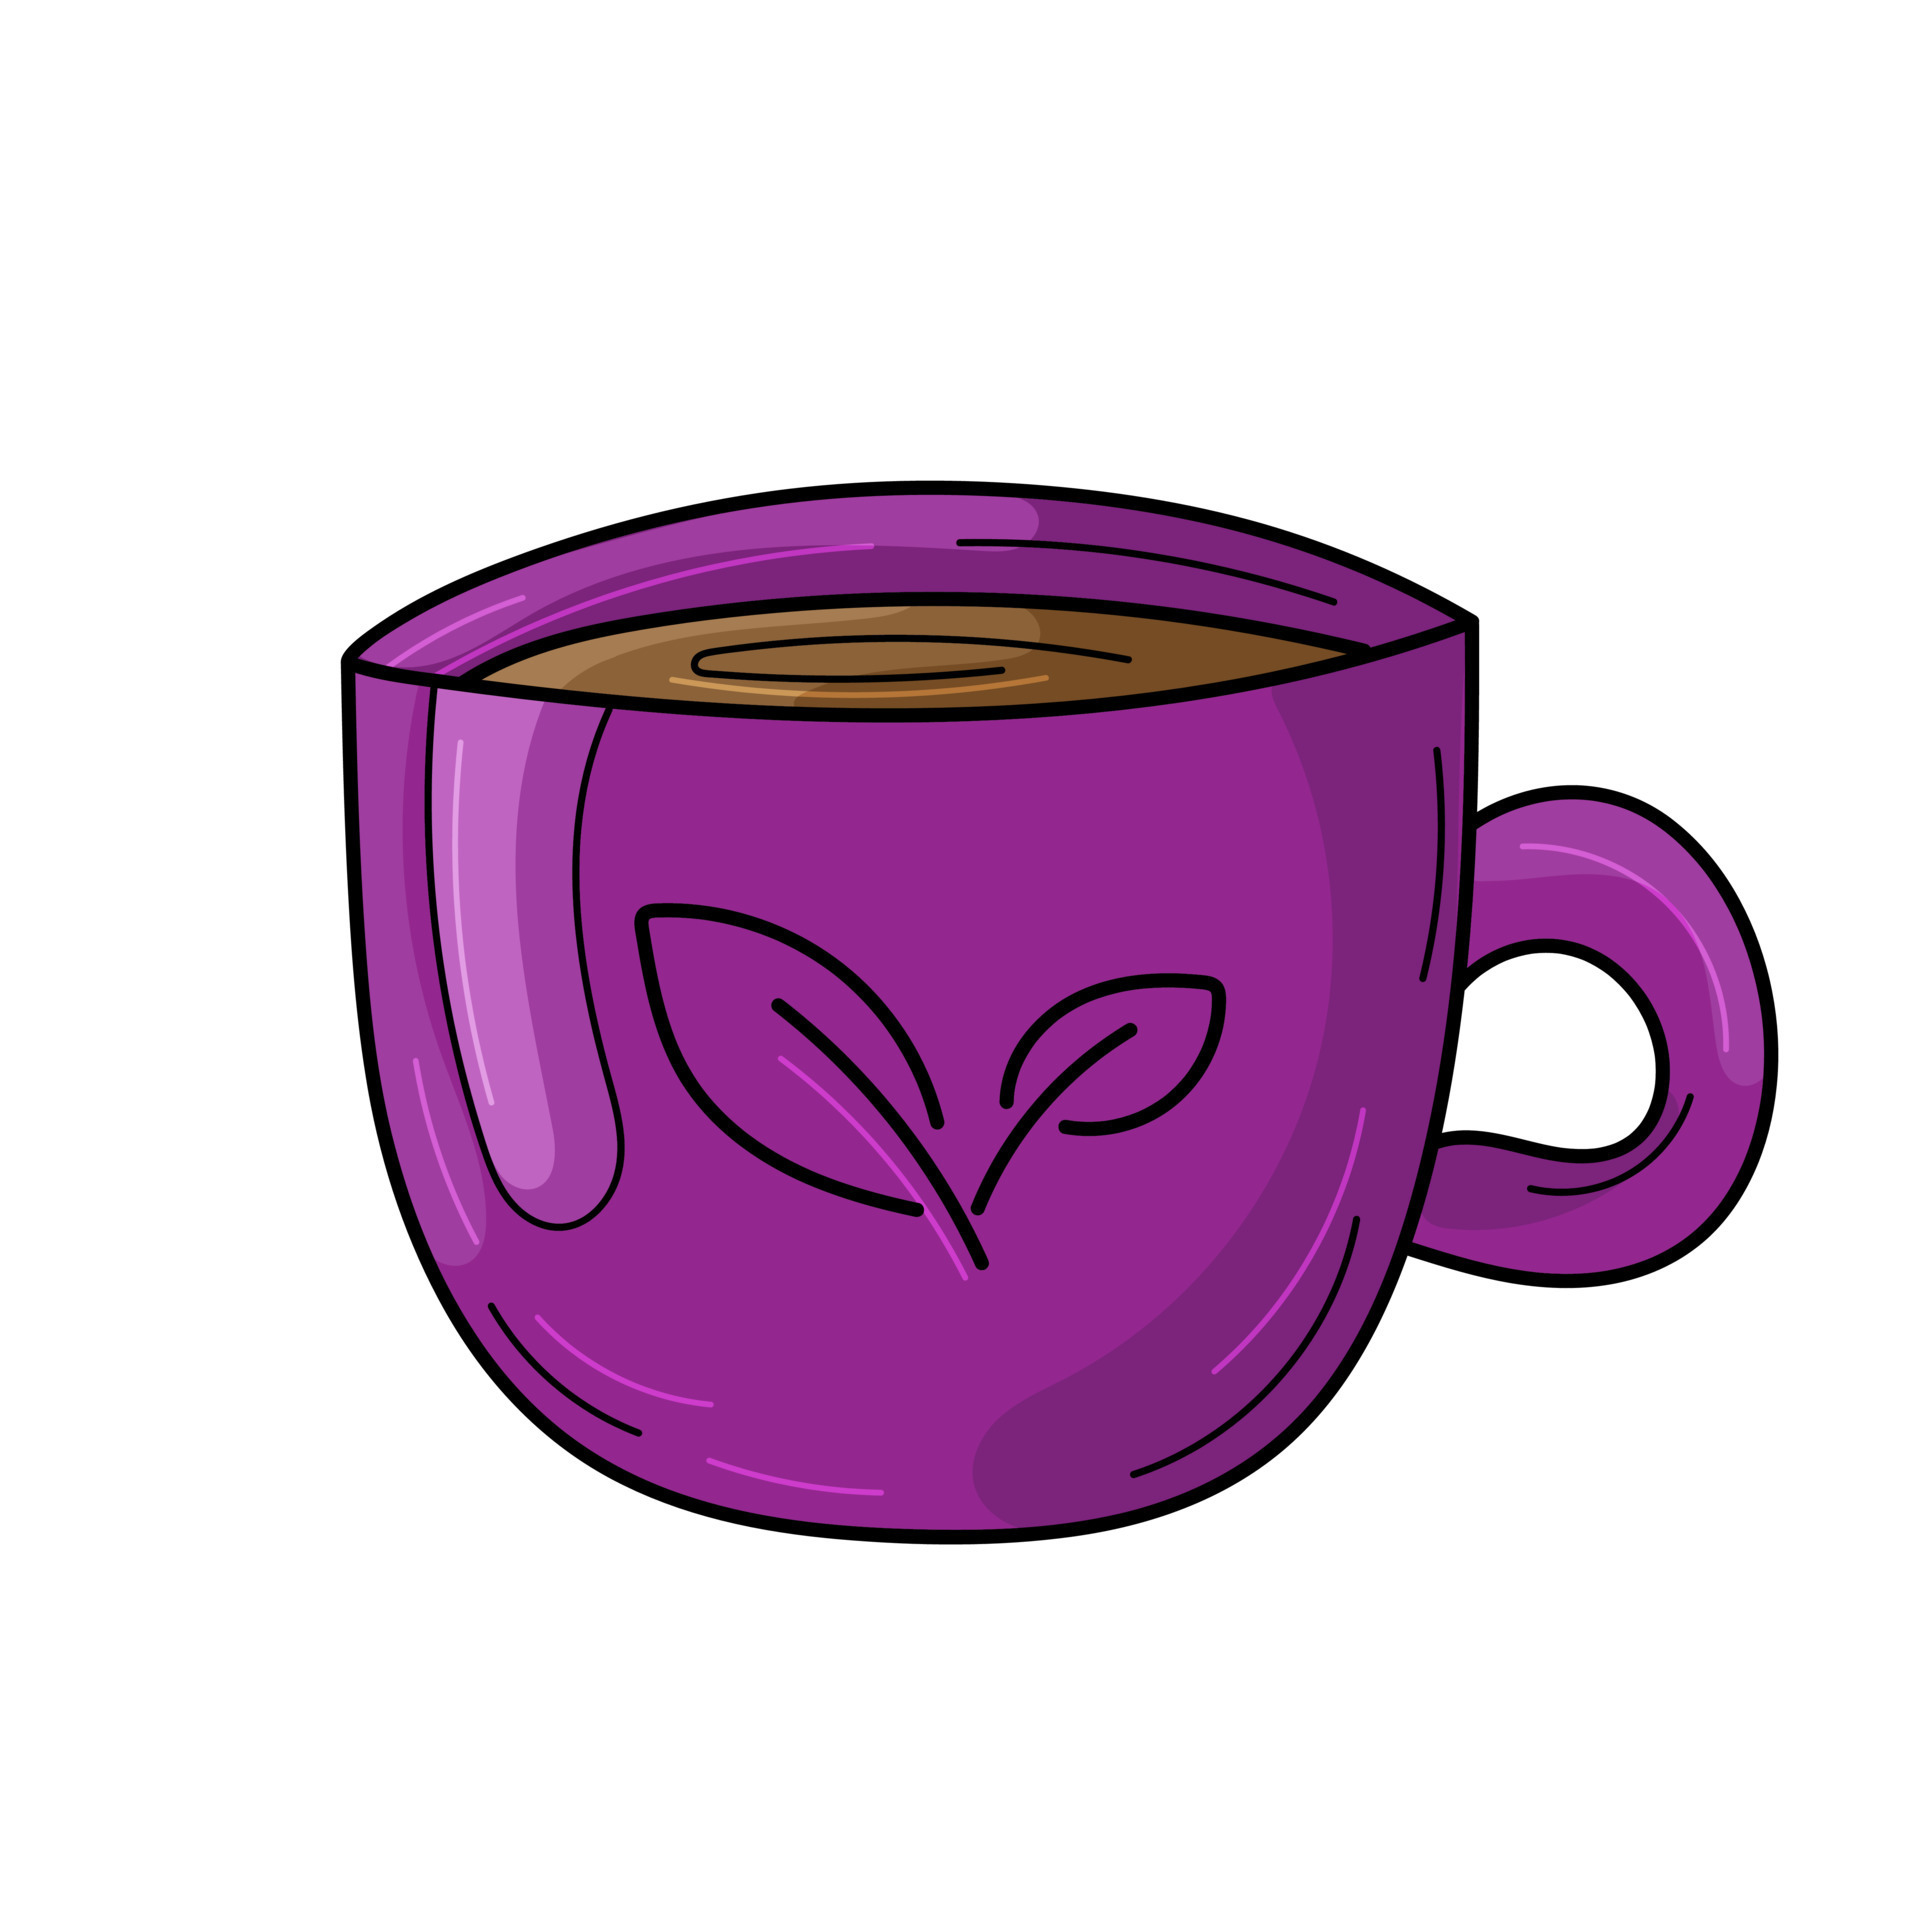 https://static.vecteezy.com/system/resources/previews/013/678/672/original/violet-cup-of-coffee-or-tea-drawing-of-a-leaf-on-a-cup-autumn-mood-illustration-cartoon-style-vector.jpg